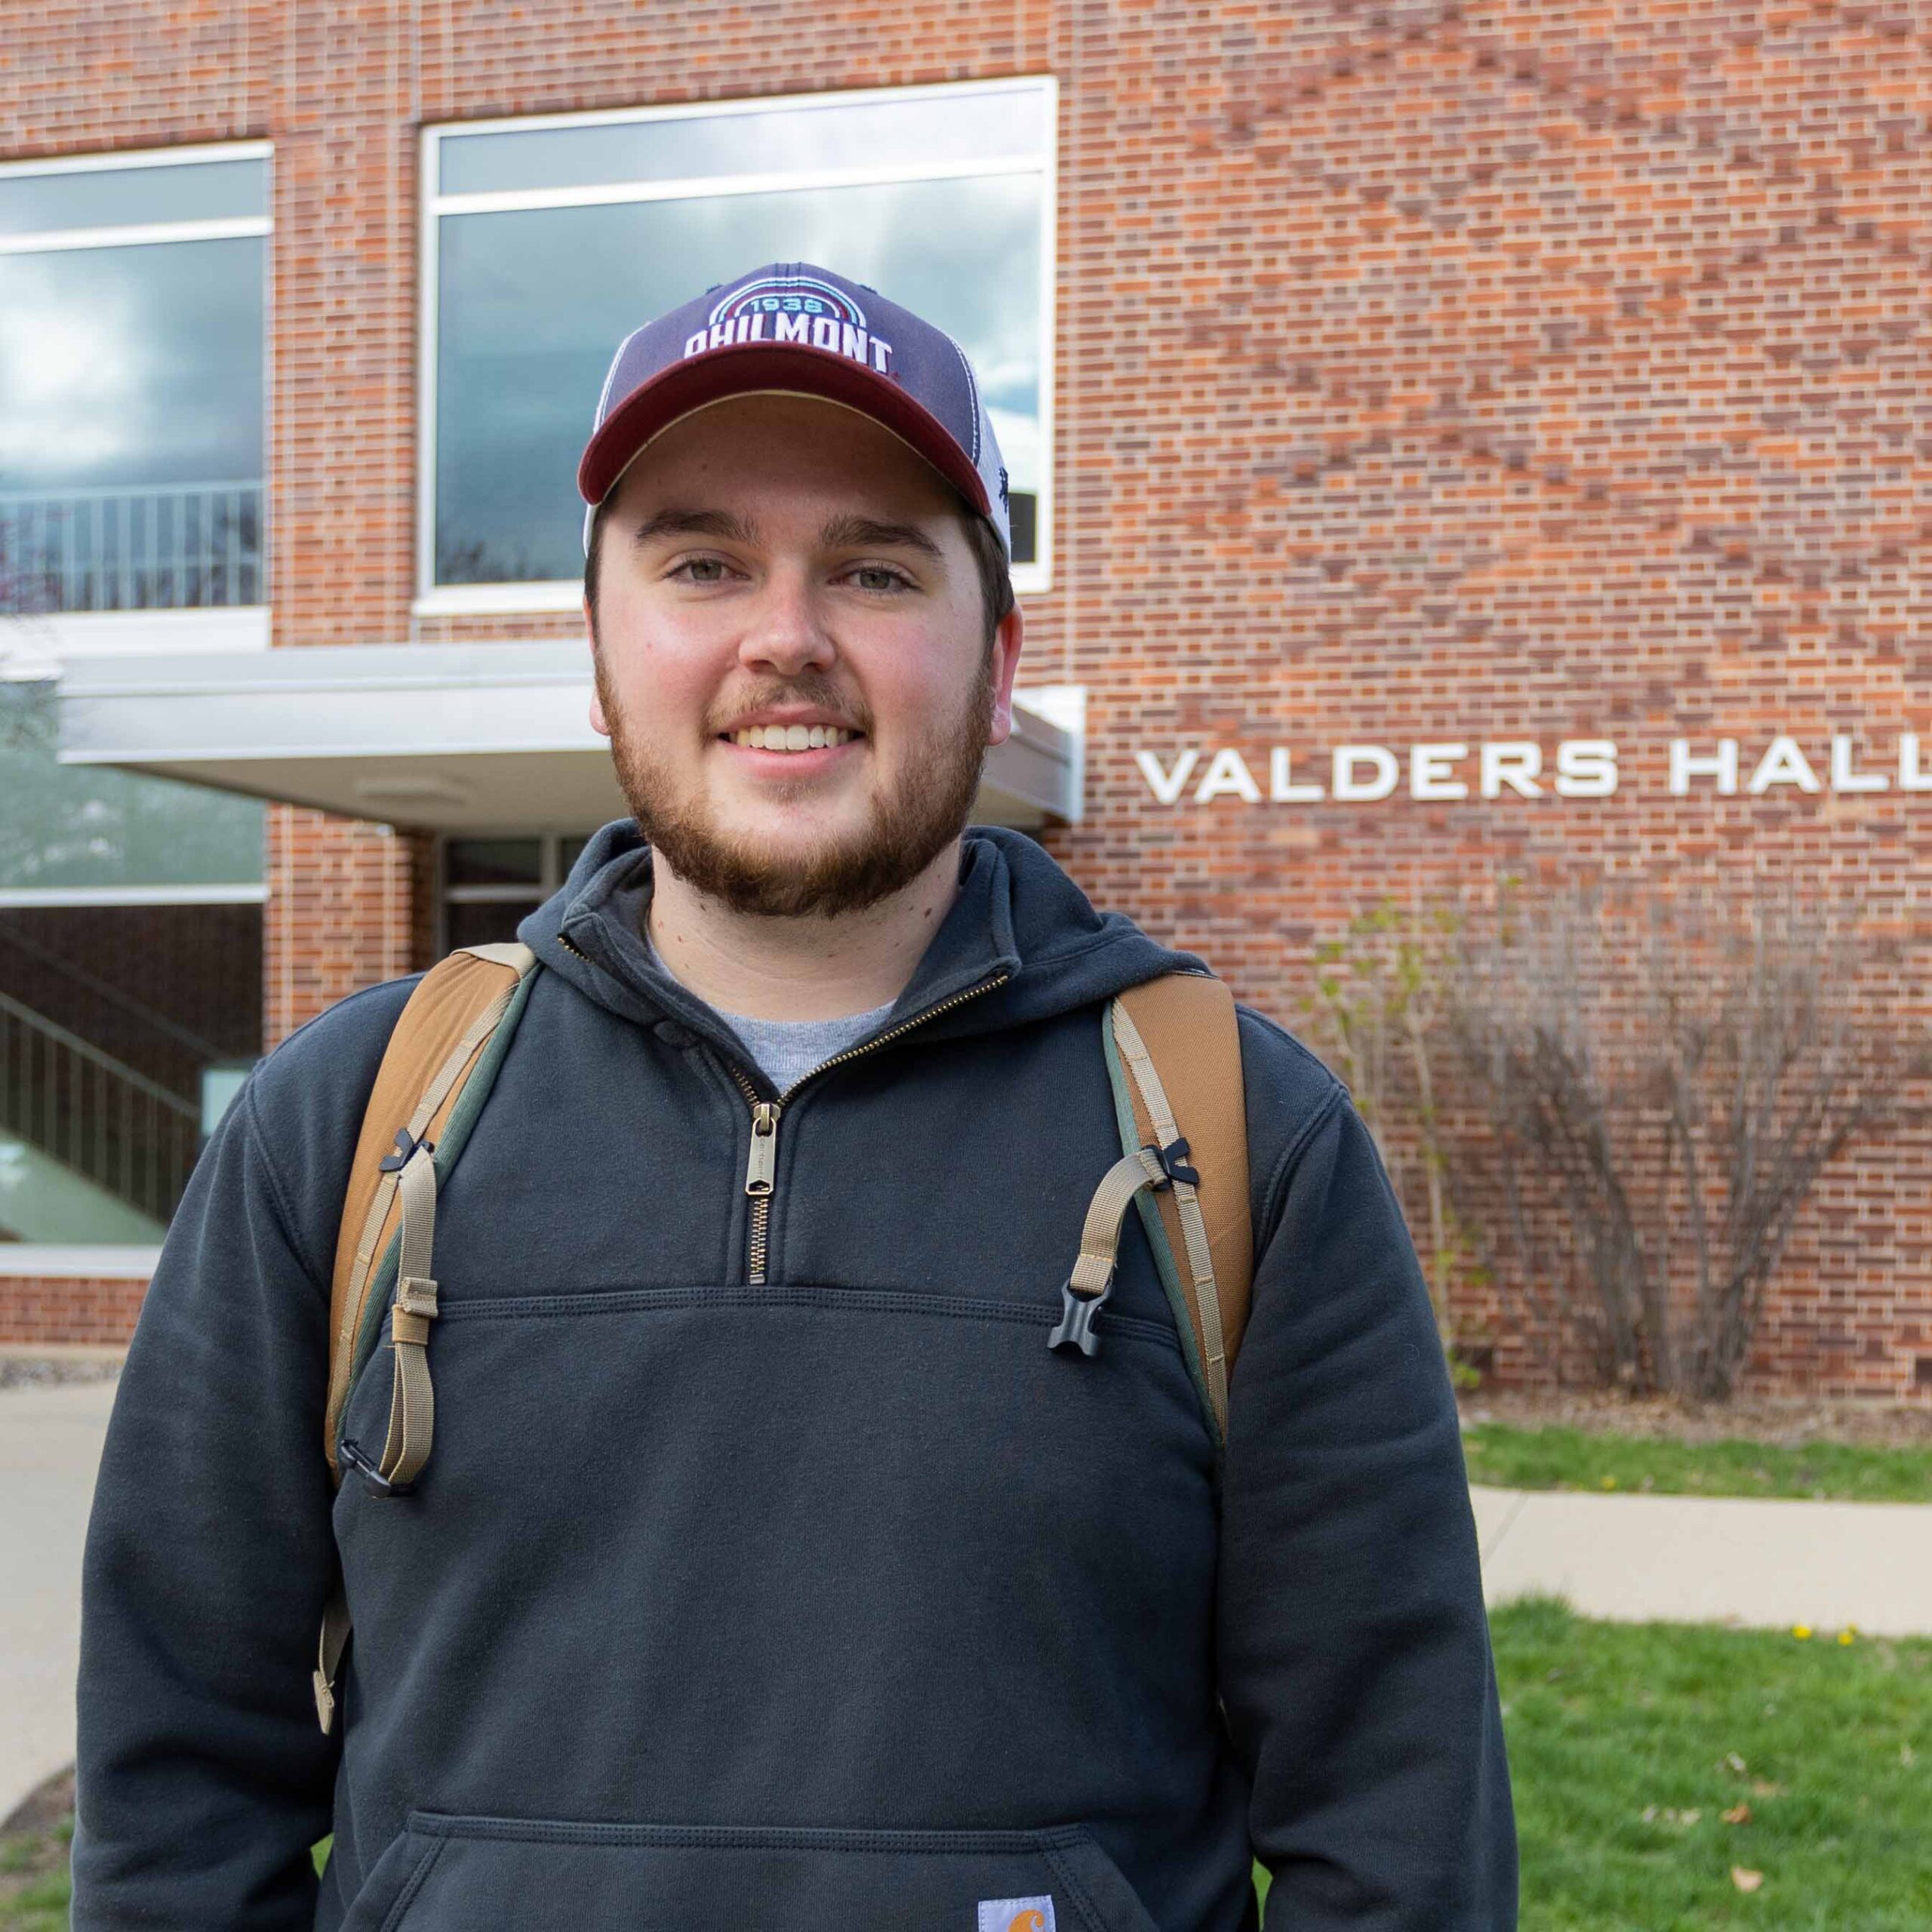 Cole wears a hat and a backpack, standing in front of Valders Hall.